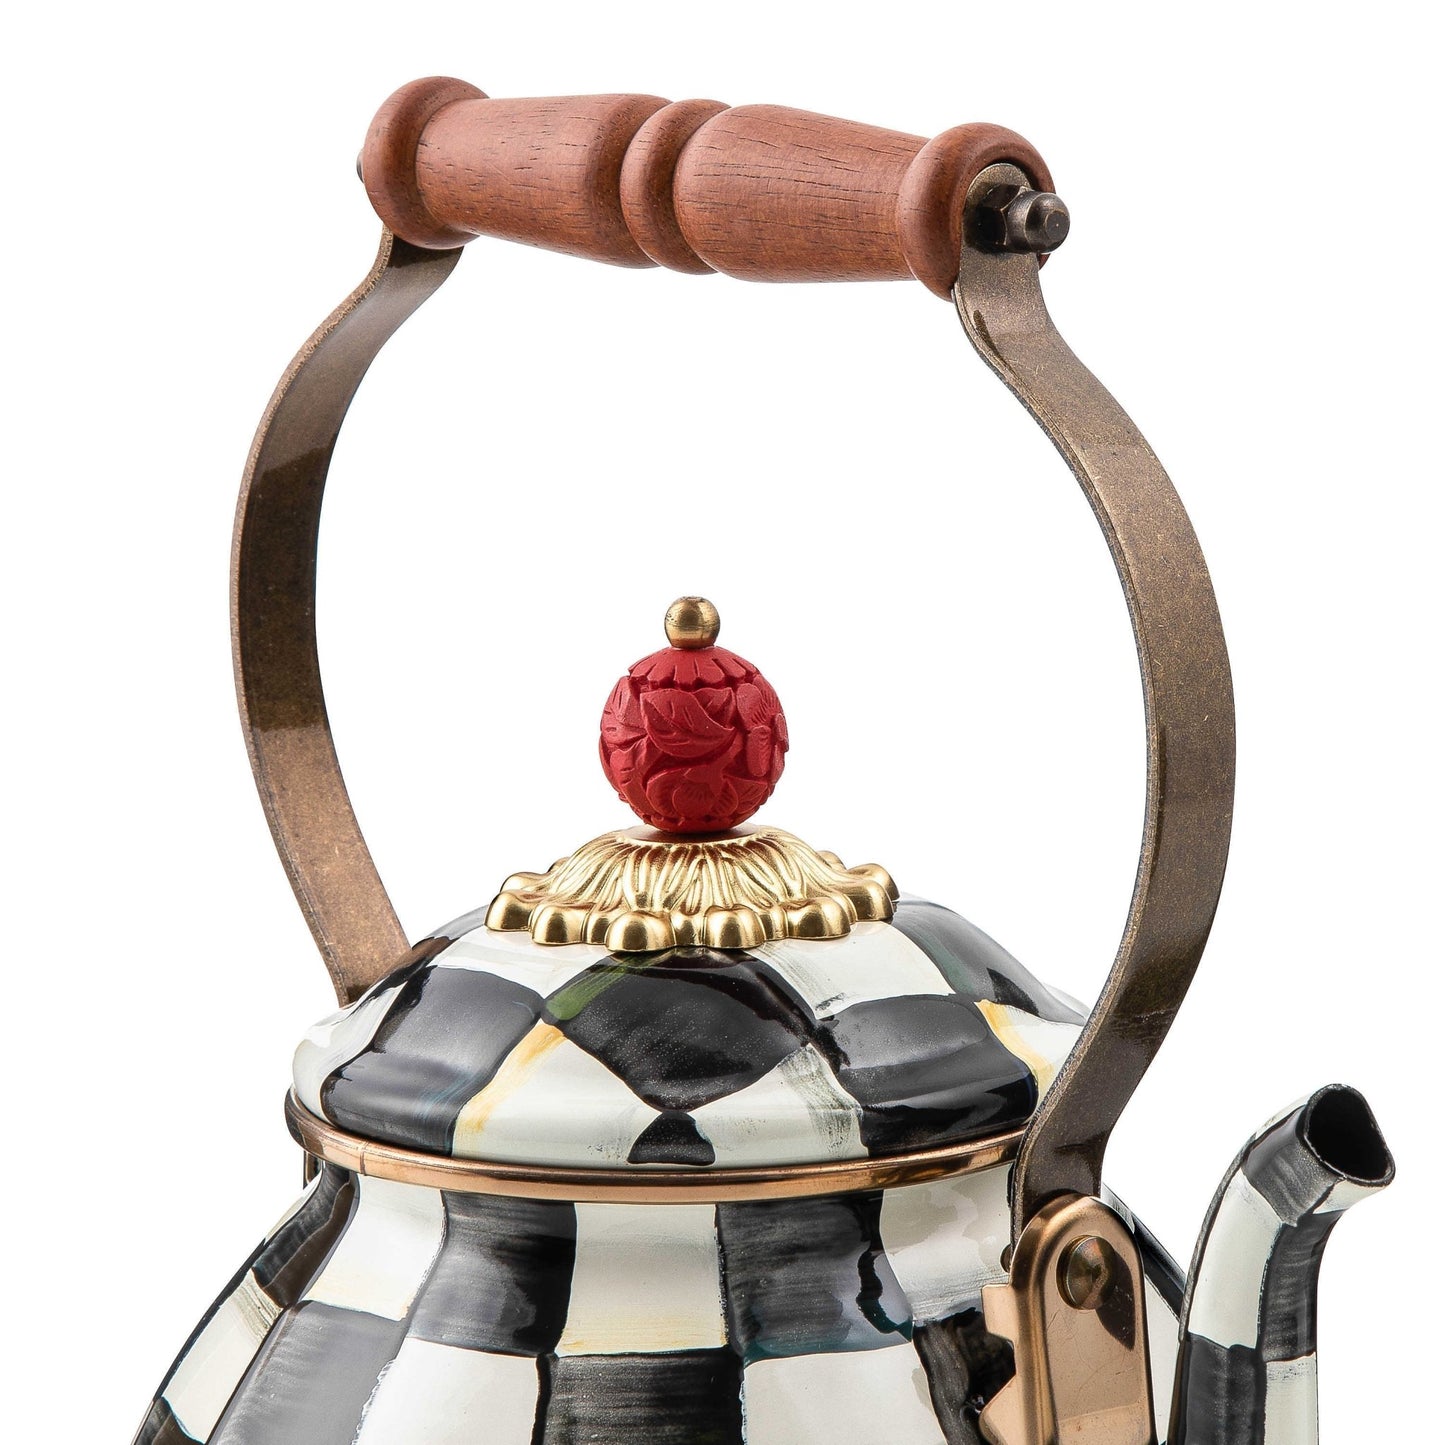 Iconic Black & White Courtly Check Enamel Tea Kettle by Mackenzie-Childs 1,89L - |VESIMI Design| Luxury and Rustic bathrooms online